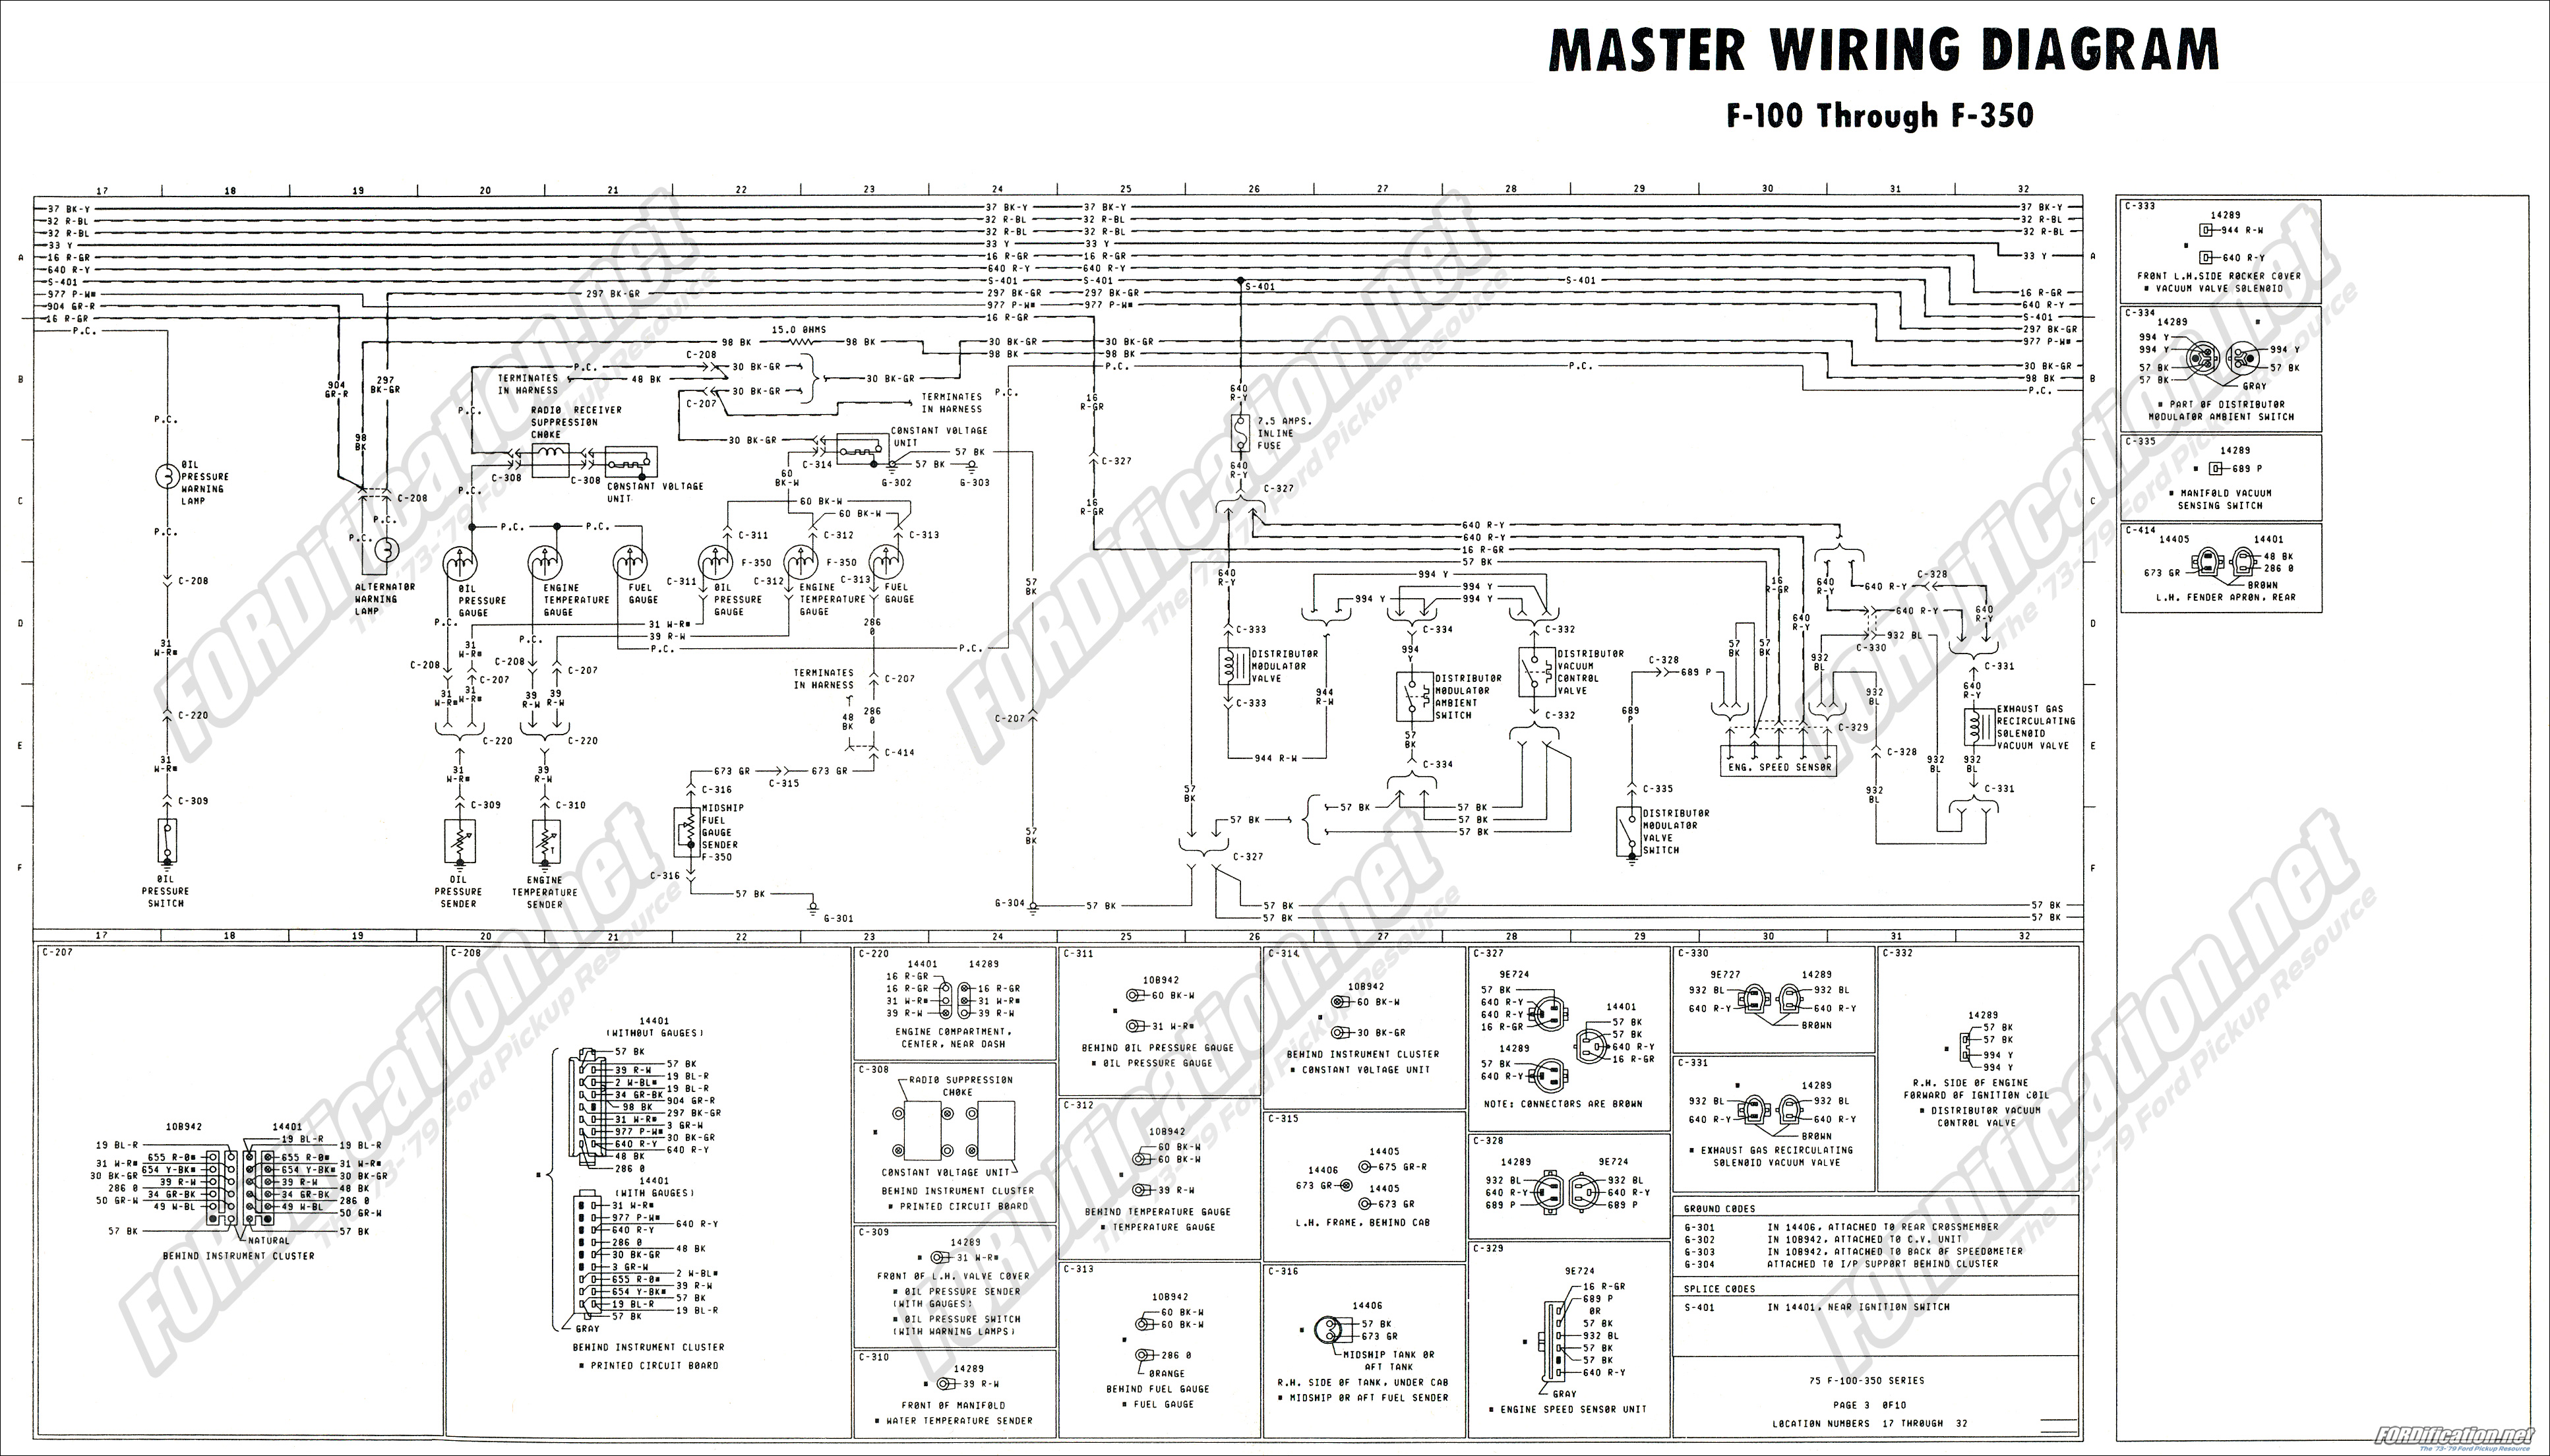 1973 1979 Ford Truck Wiring Diagrams, 1978 Ford F150 Fuel Gauge Wiring Diagram